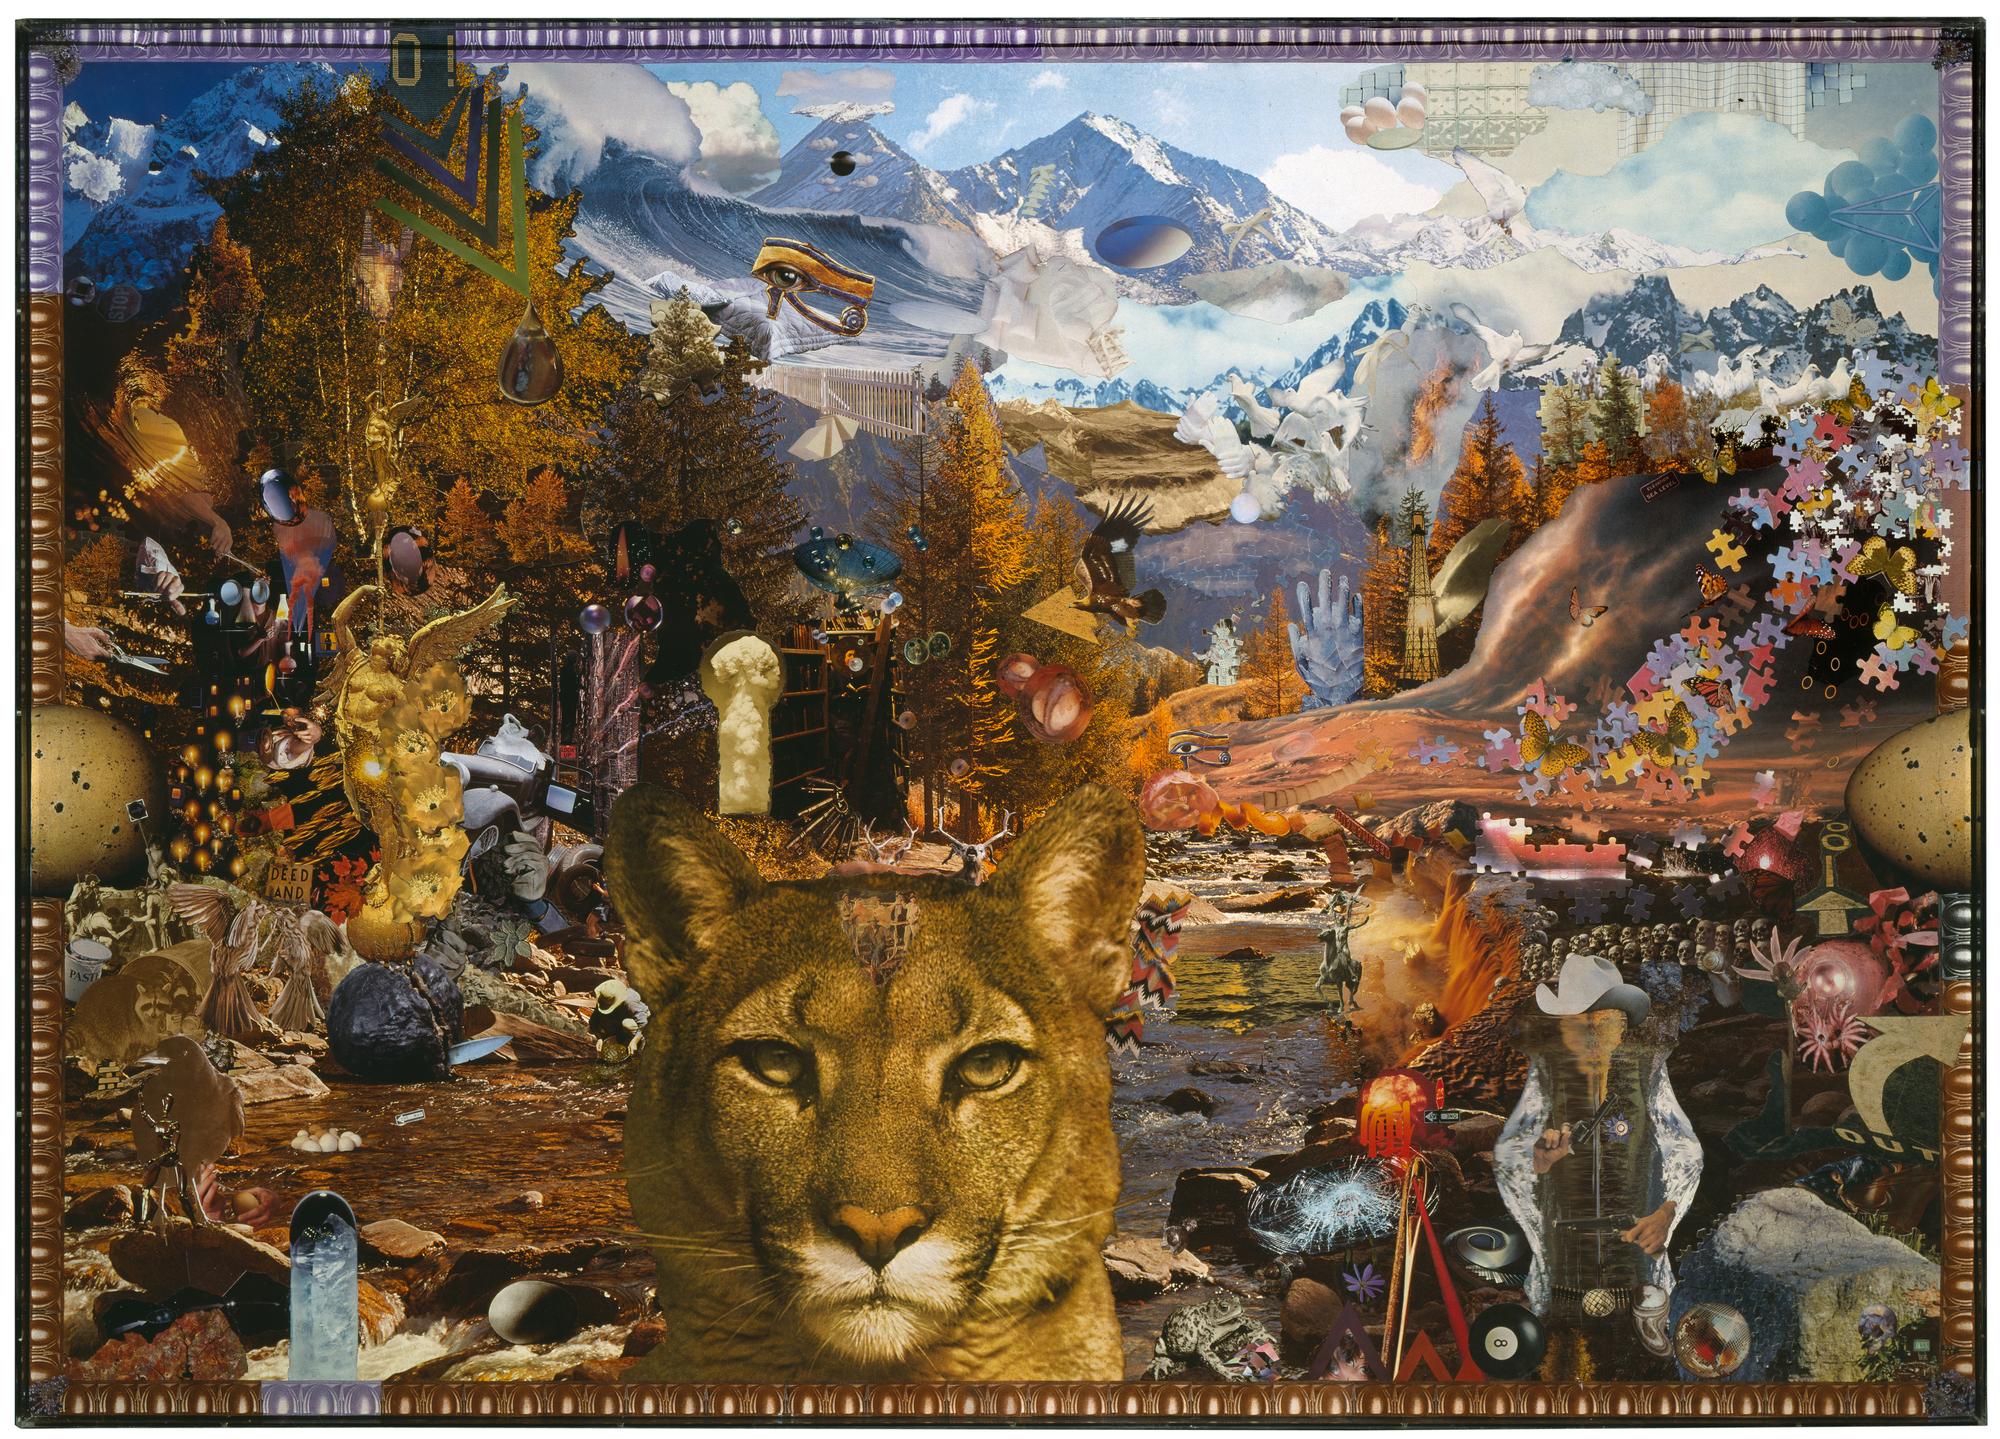 Snowy mountains and ocean waves converge in the blue background of this saturated collage, with the foreground full of golden hues centering a mountain lion who makes direct eye contact with the viewer.